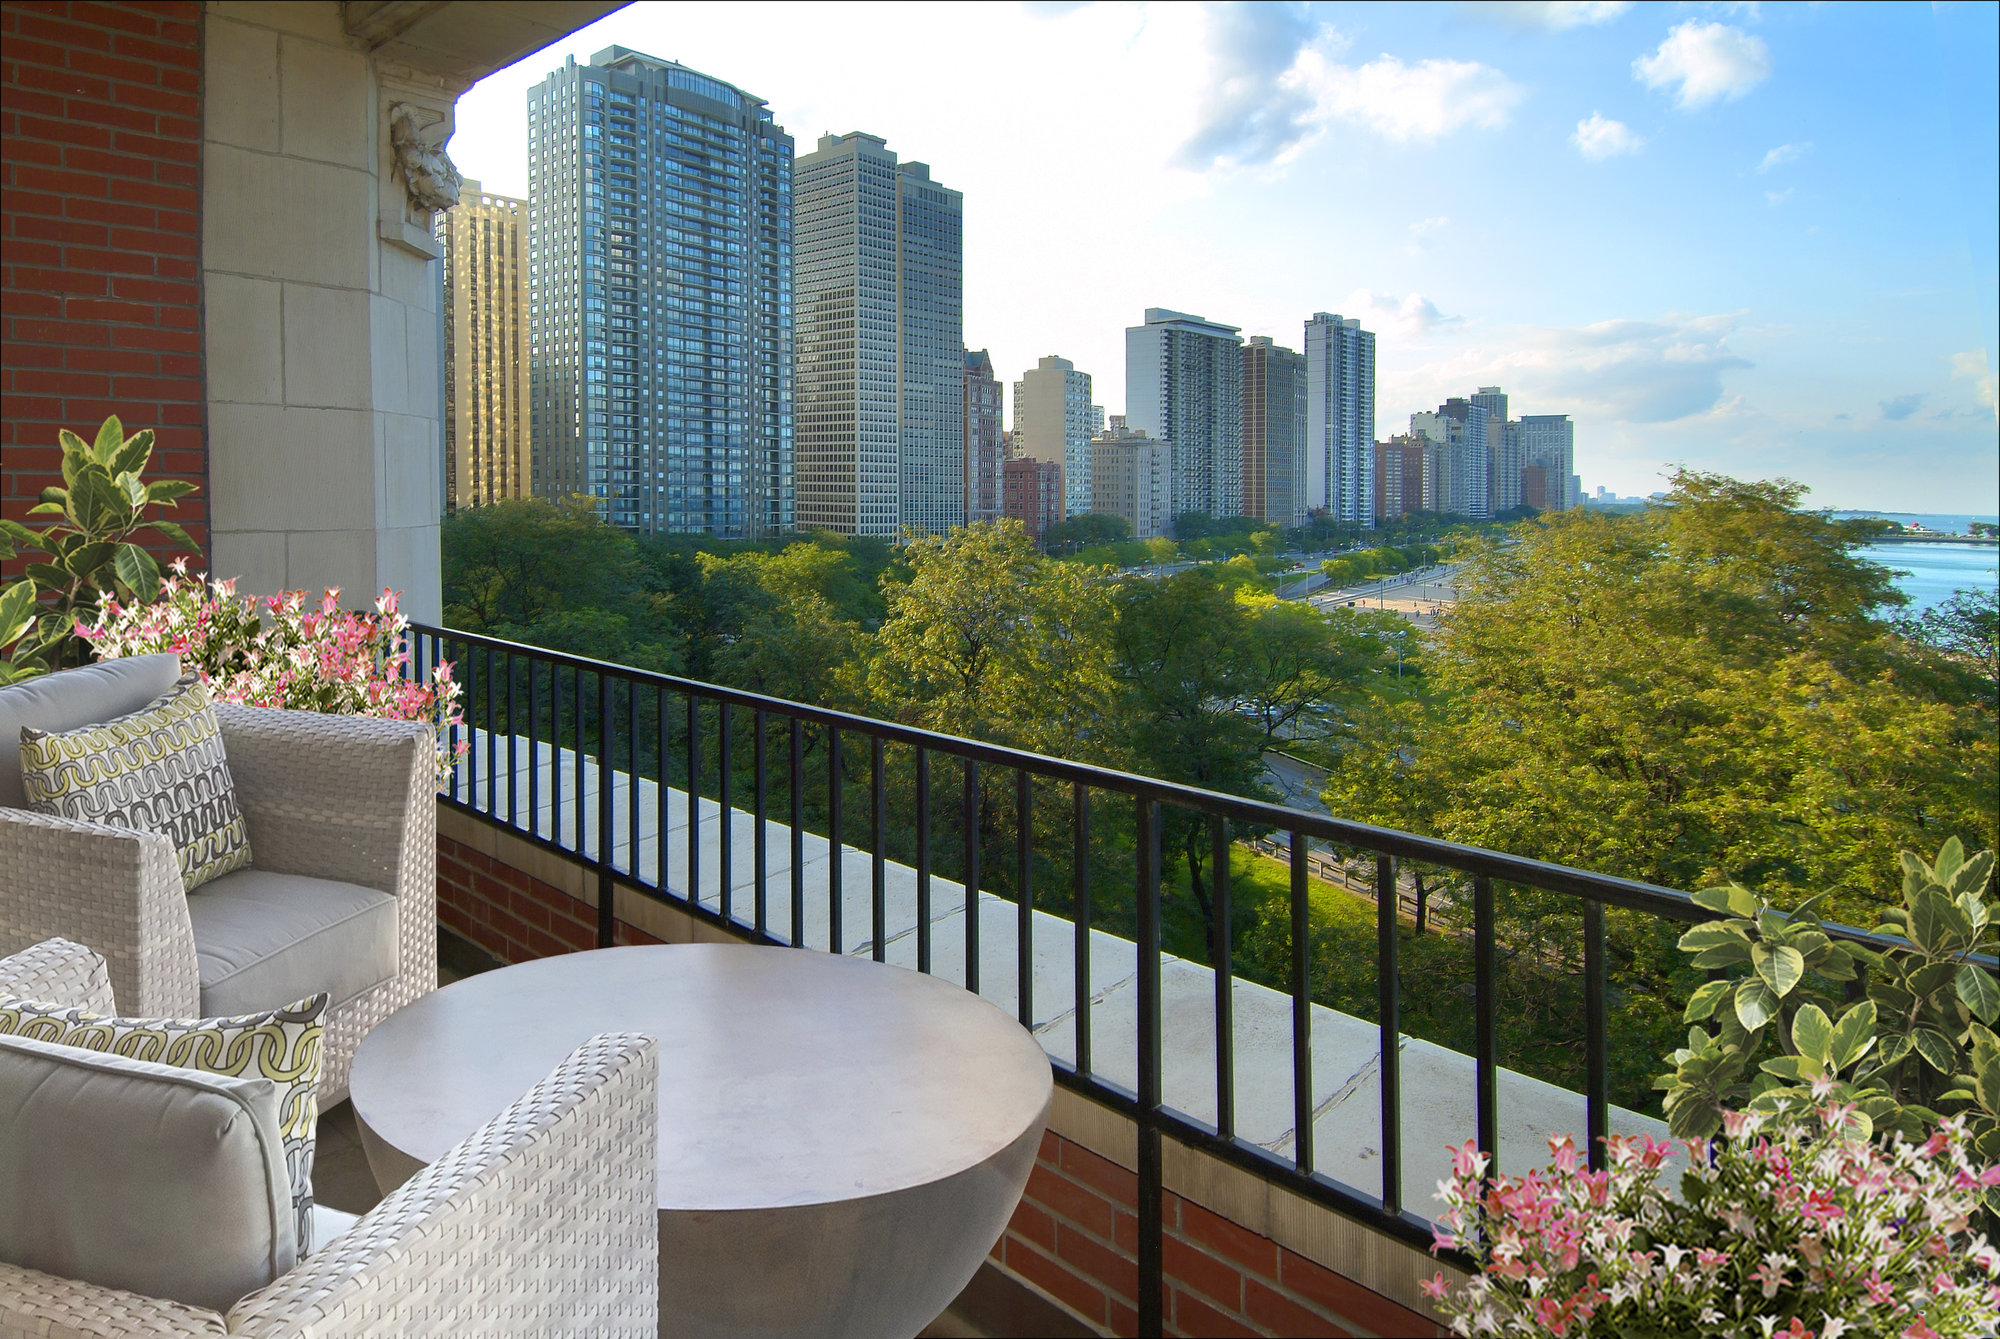 Streeterville condos with private balconies